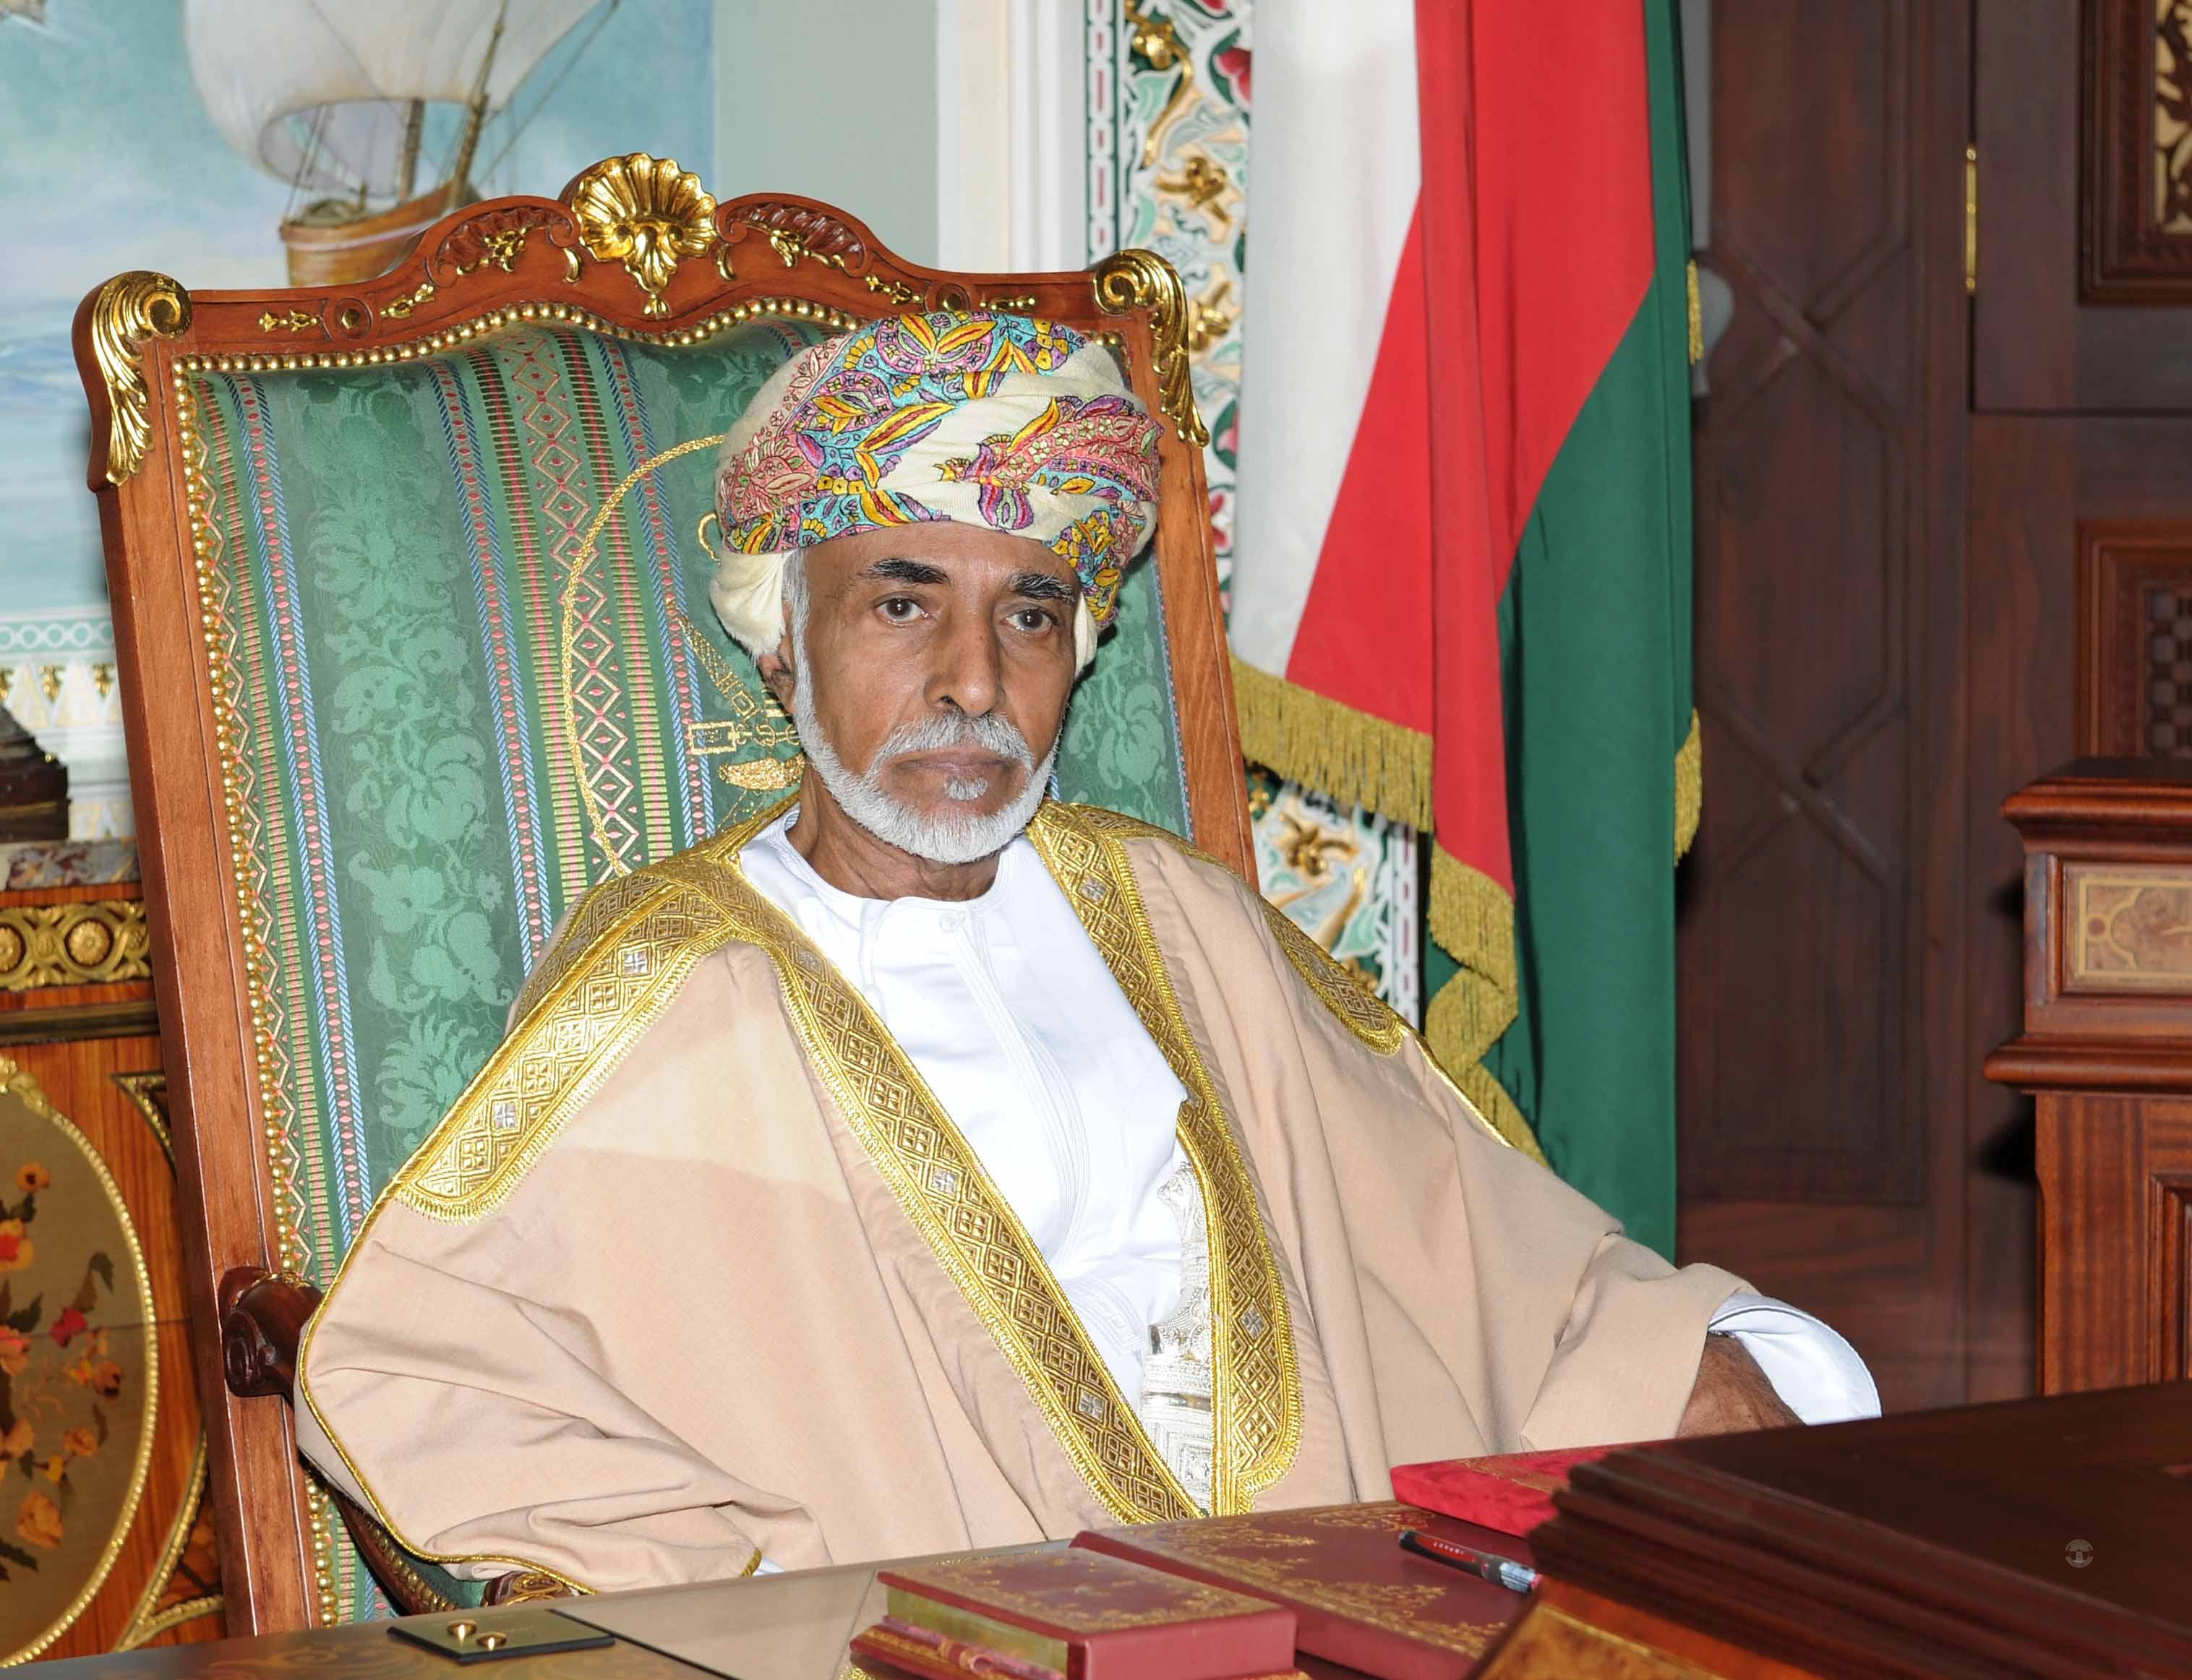 His Majesty Sultan Qaboos receives message from Prime Minister of Australia